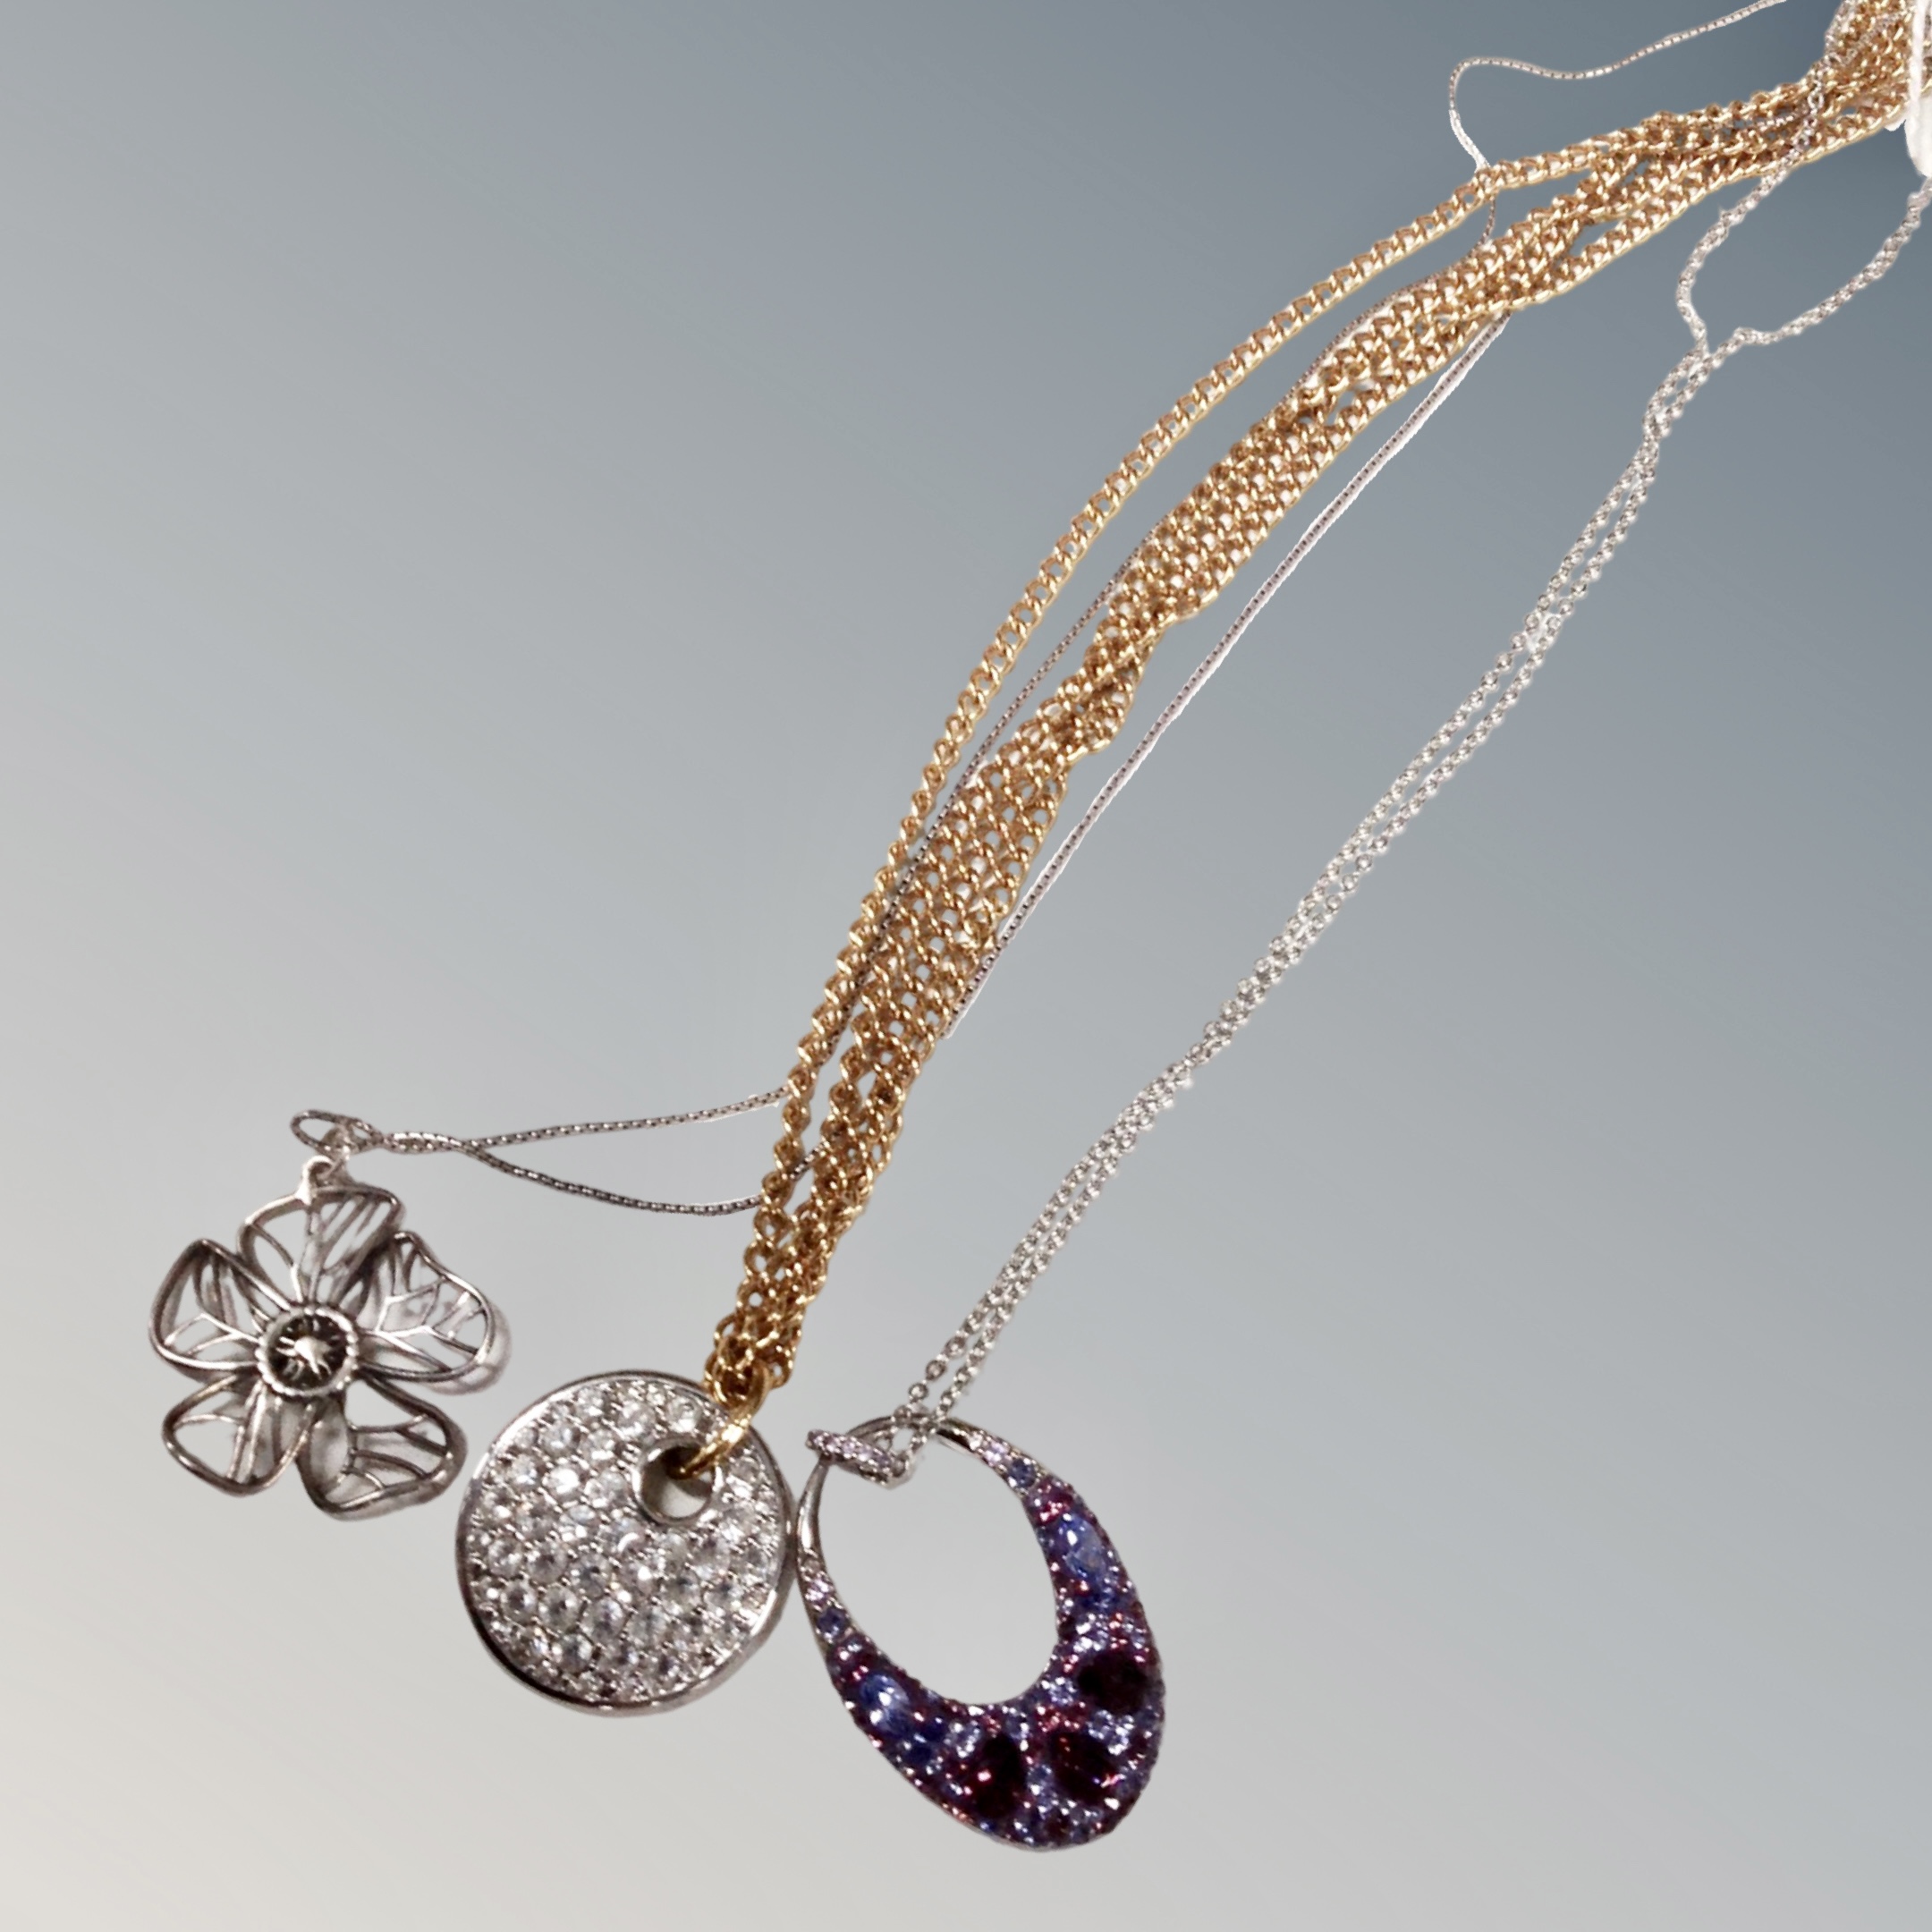 A solid silver magnolia pendant and chain together with a Swarovski chain with encrusted lavender